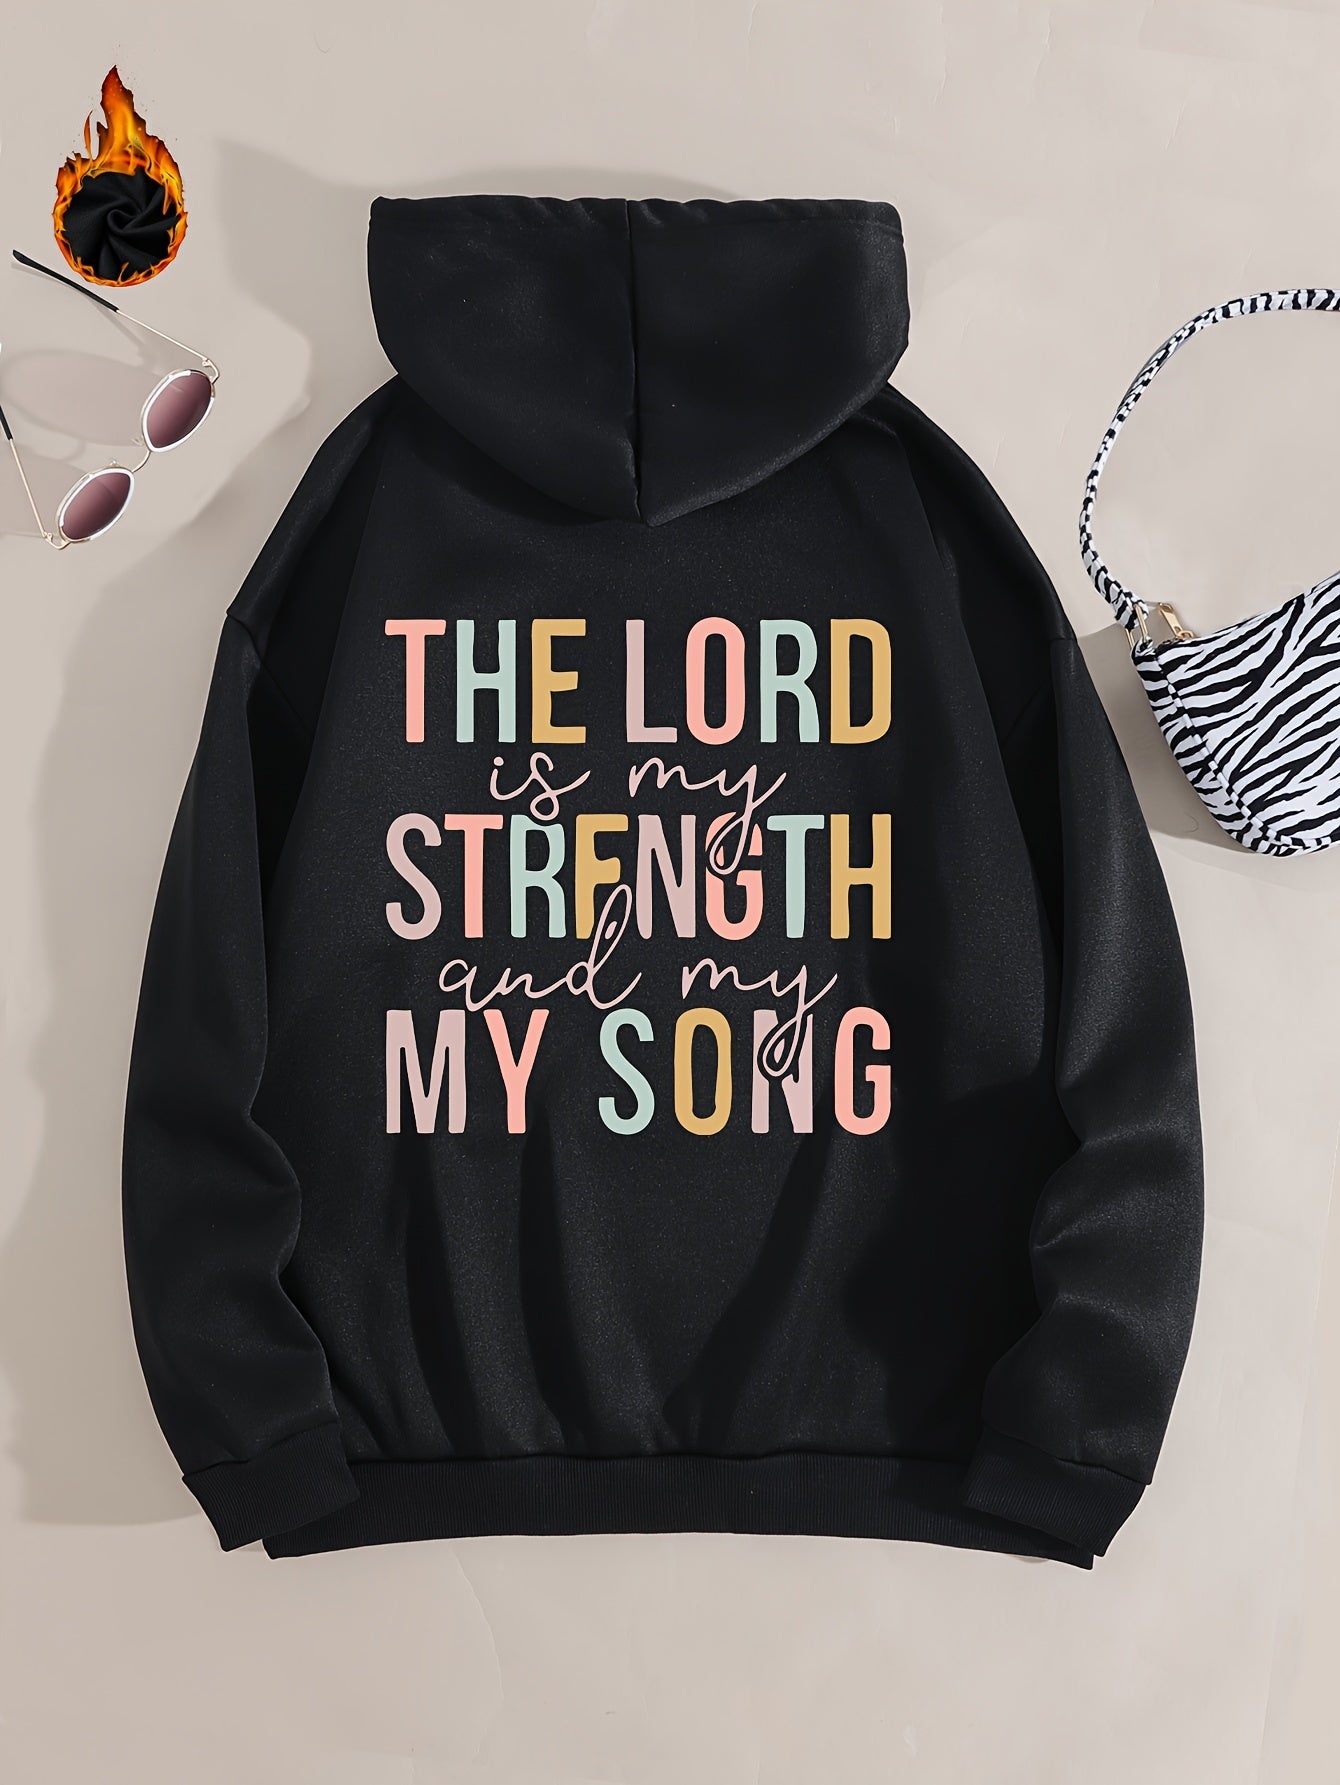 The Lord Is My Strength And My Song Women's Christian Pullover Hooded Sweatshirt claimedbygoddesigns